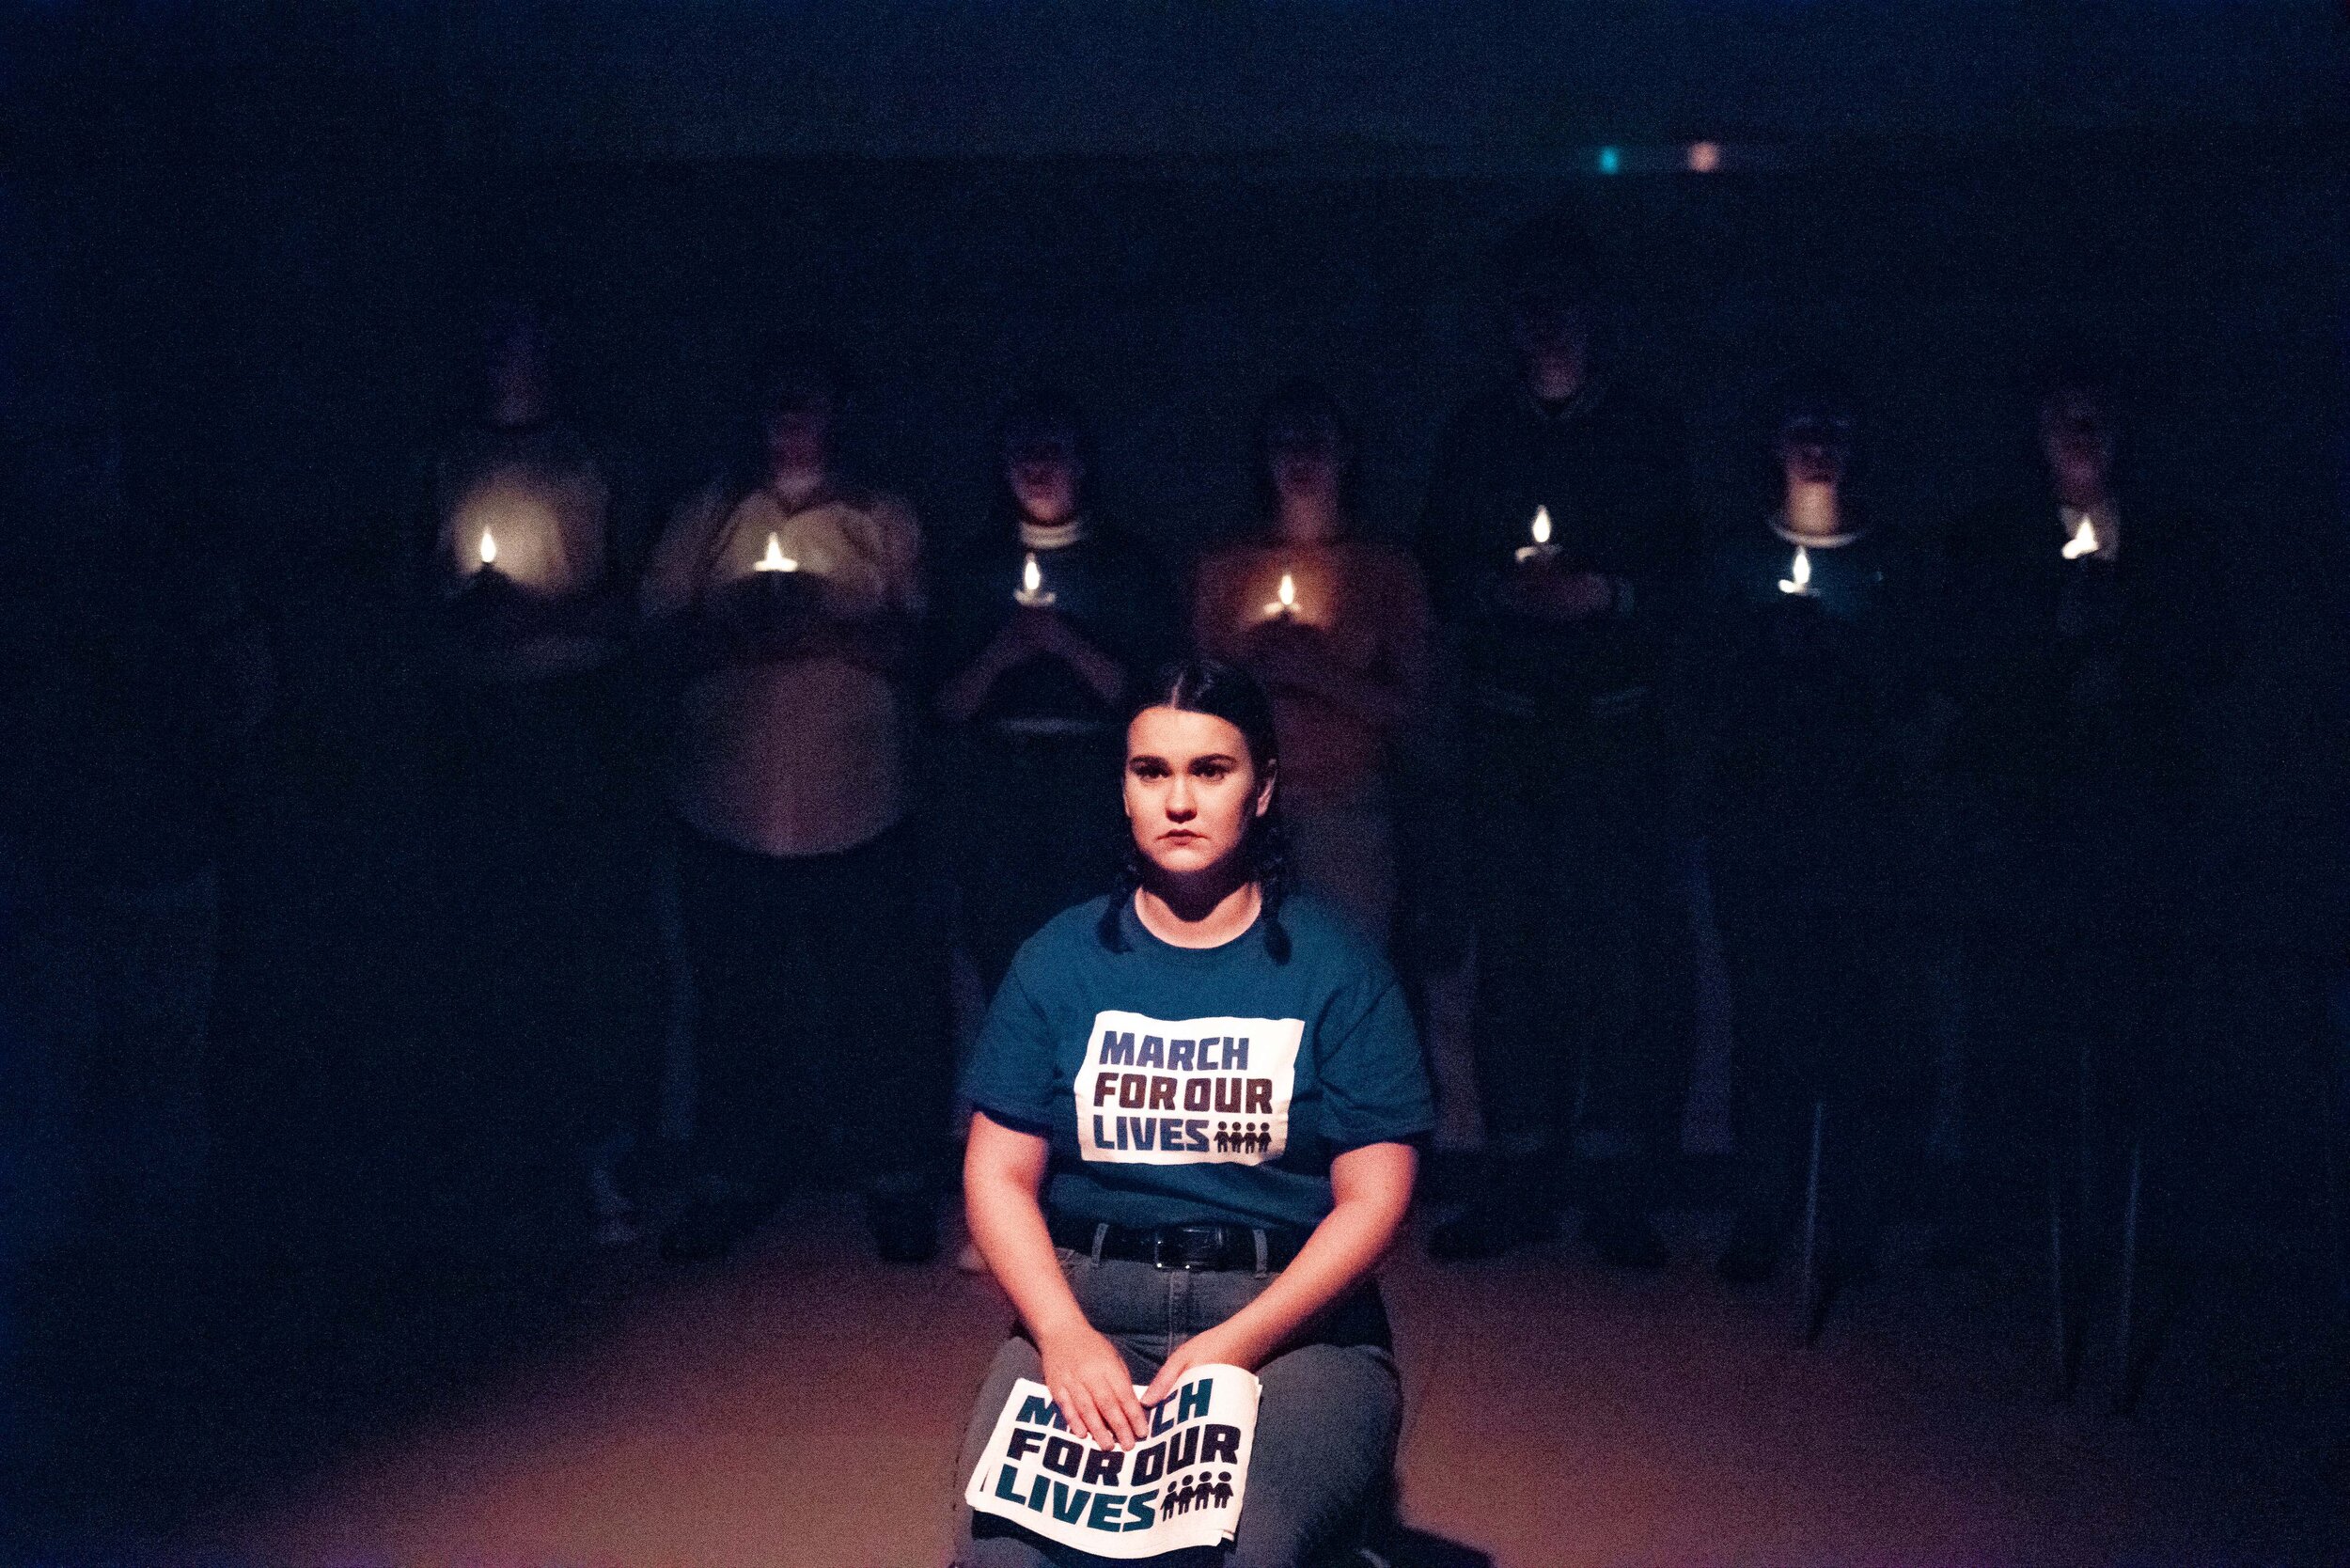  An actor wearing a blue shirt with the March for Our Lives logo and holding a March for Our Lives poster sits on their knees in front of a line of shadowy actors holding small candles. 